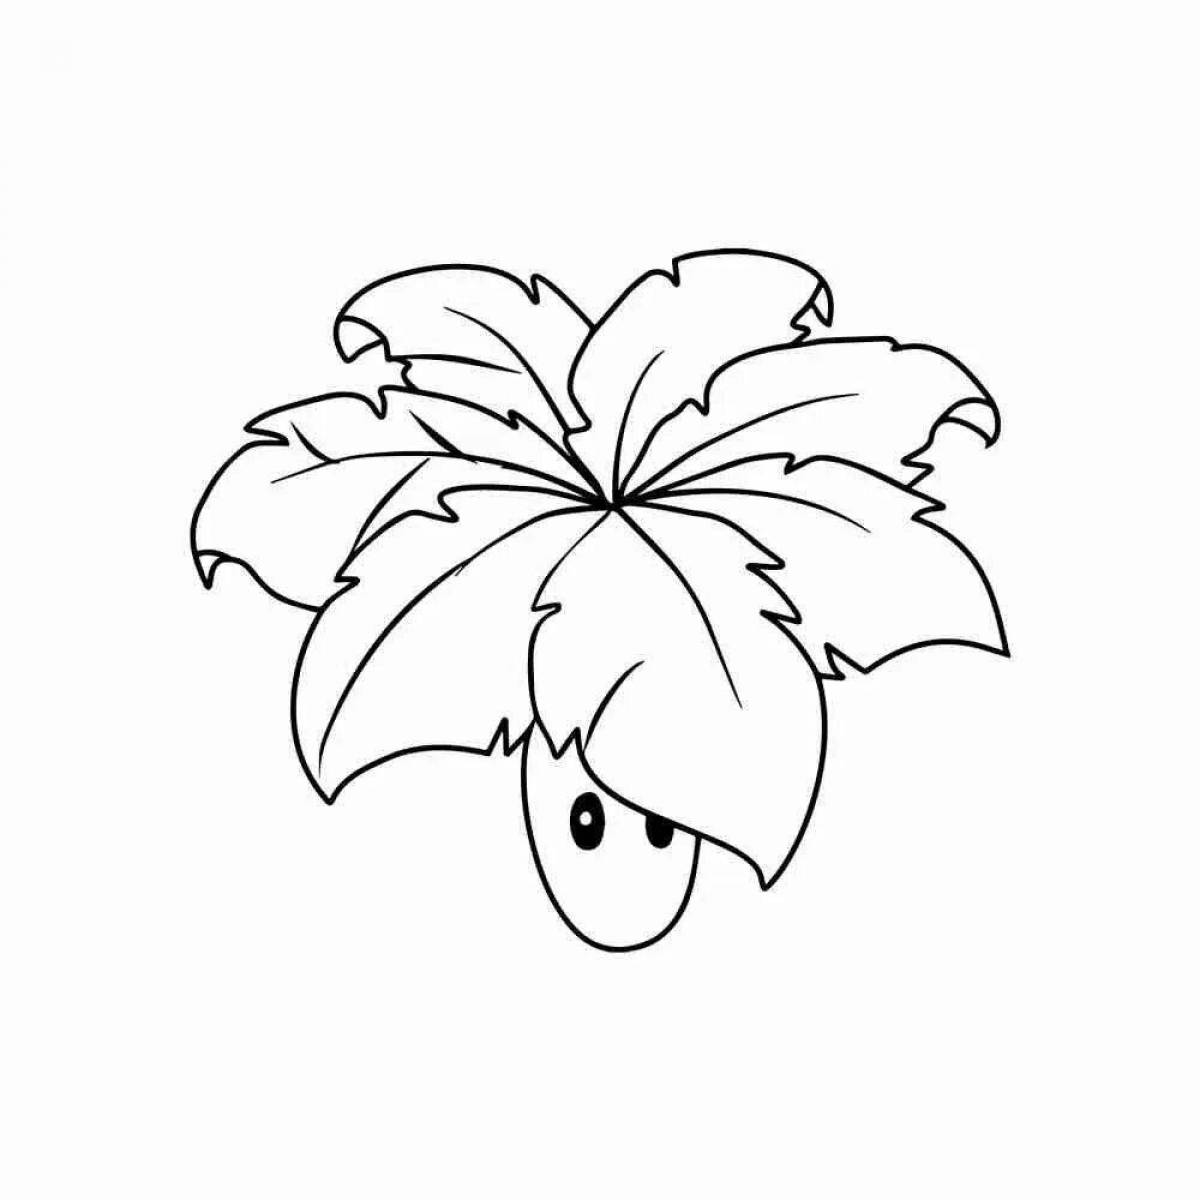 Striking plants vs zombies 1 plant coloring page